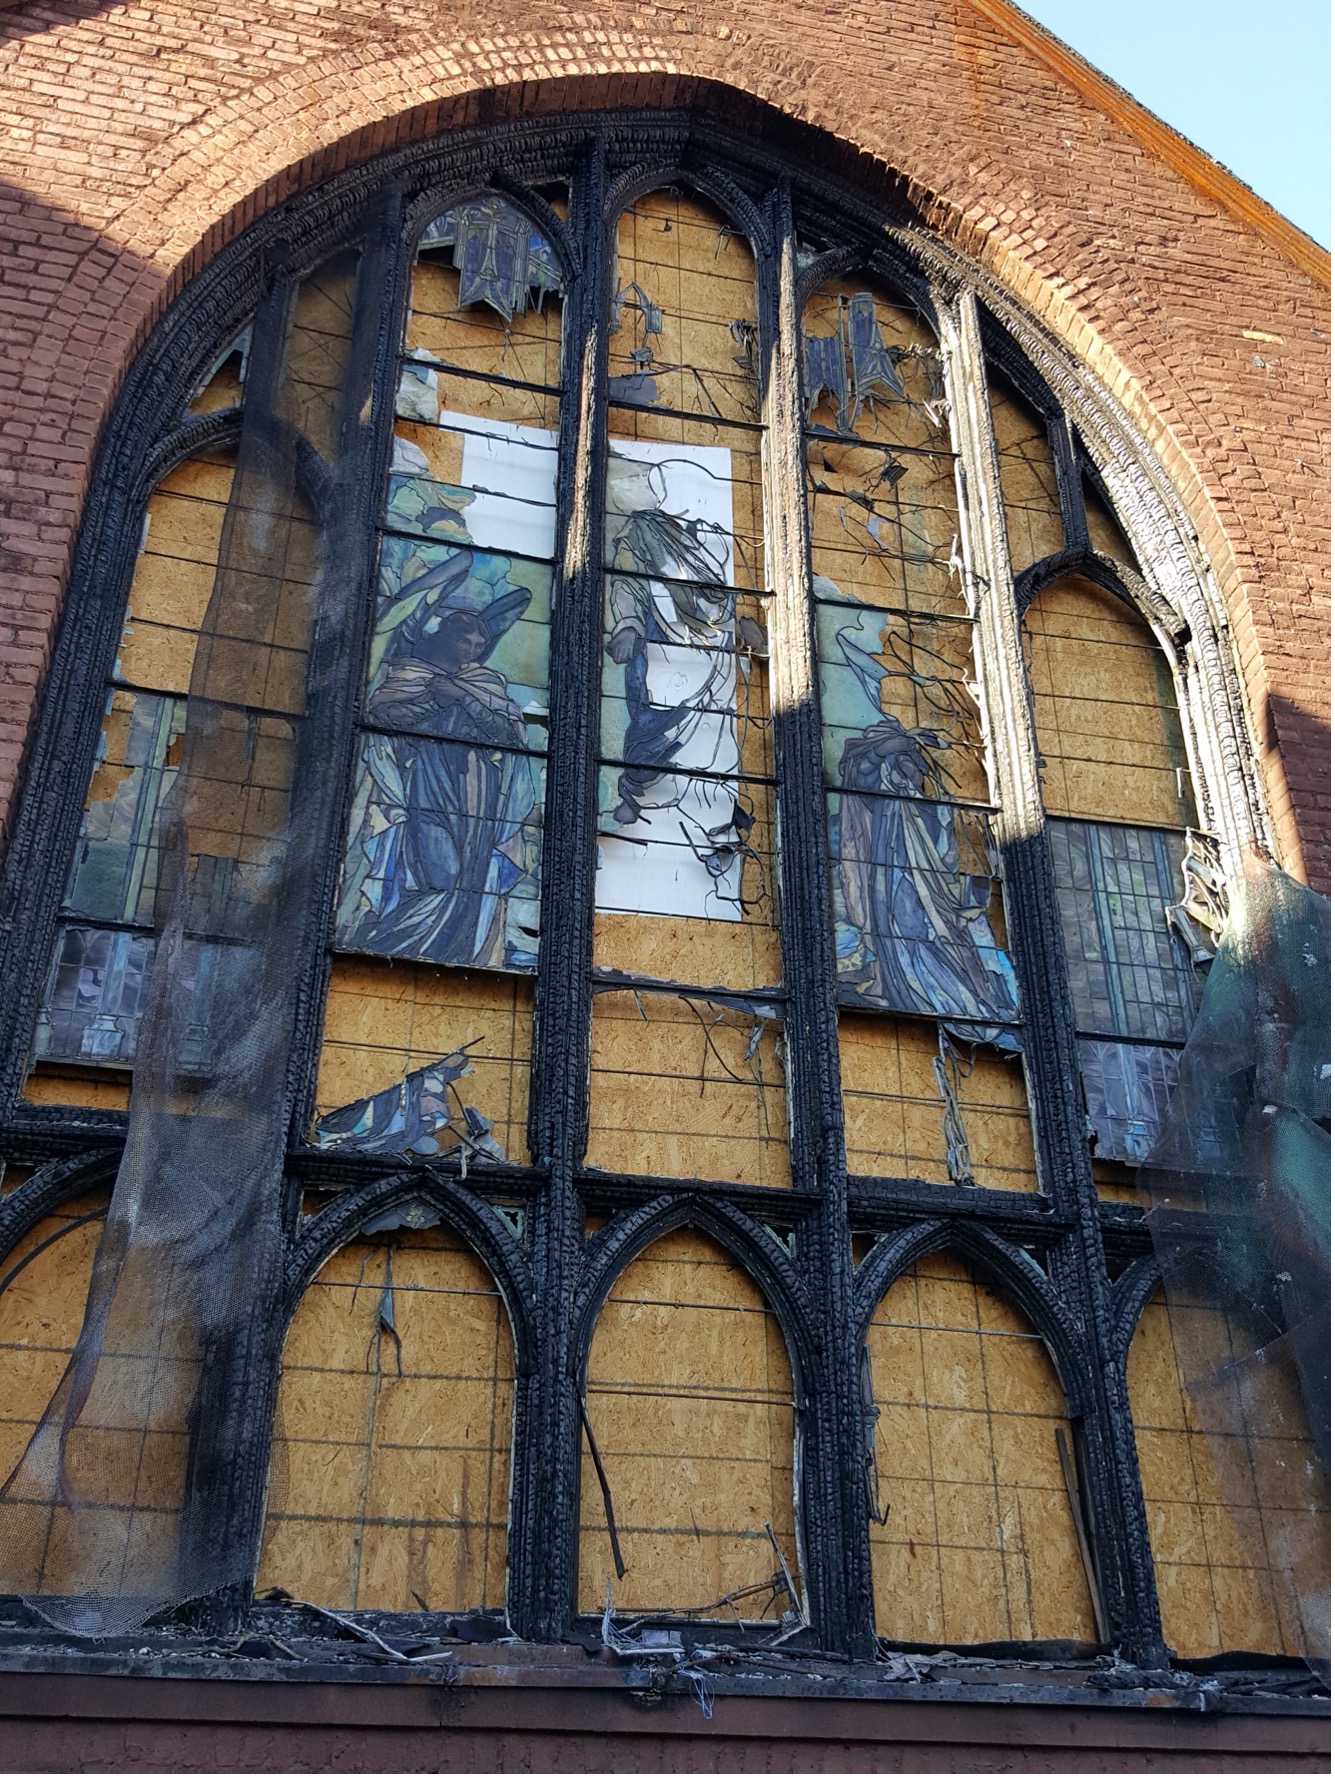 Fire damaged Stained Glass